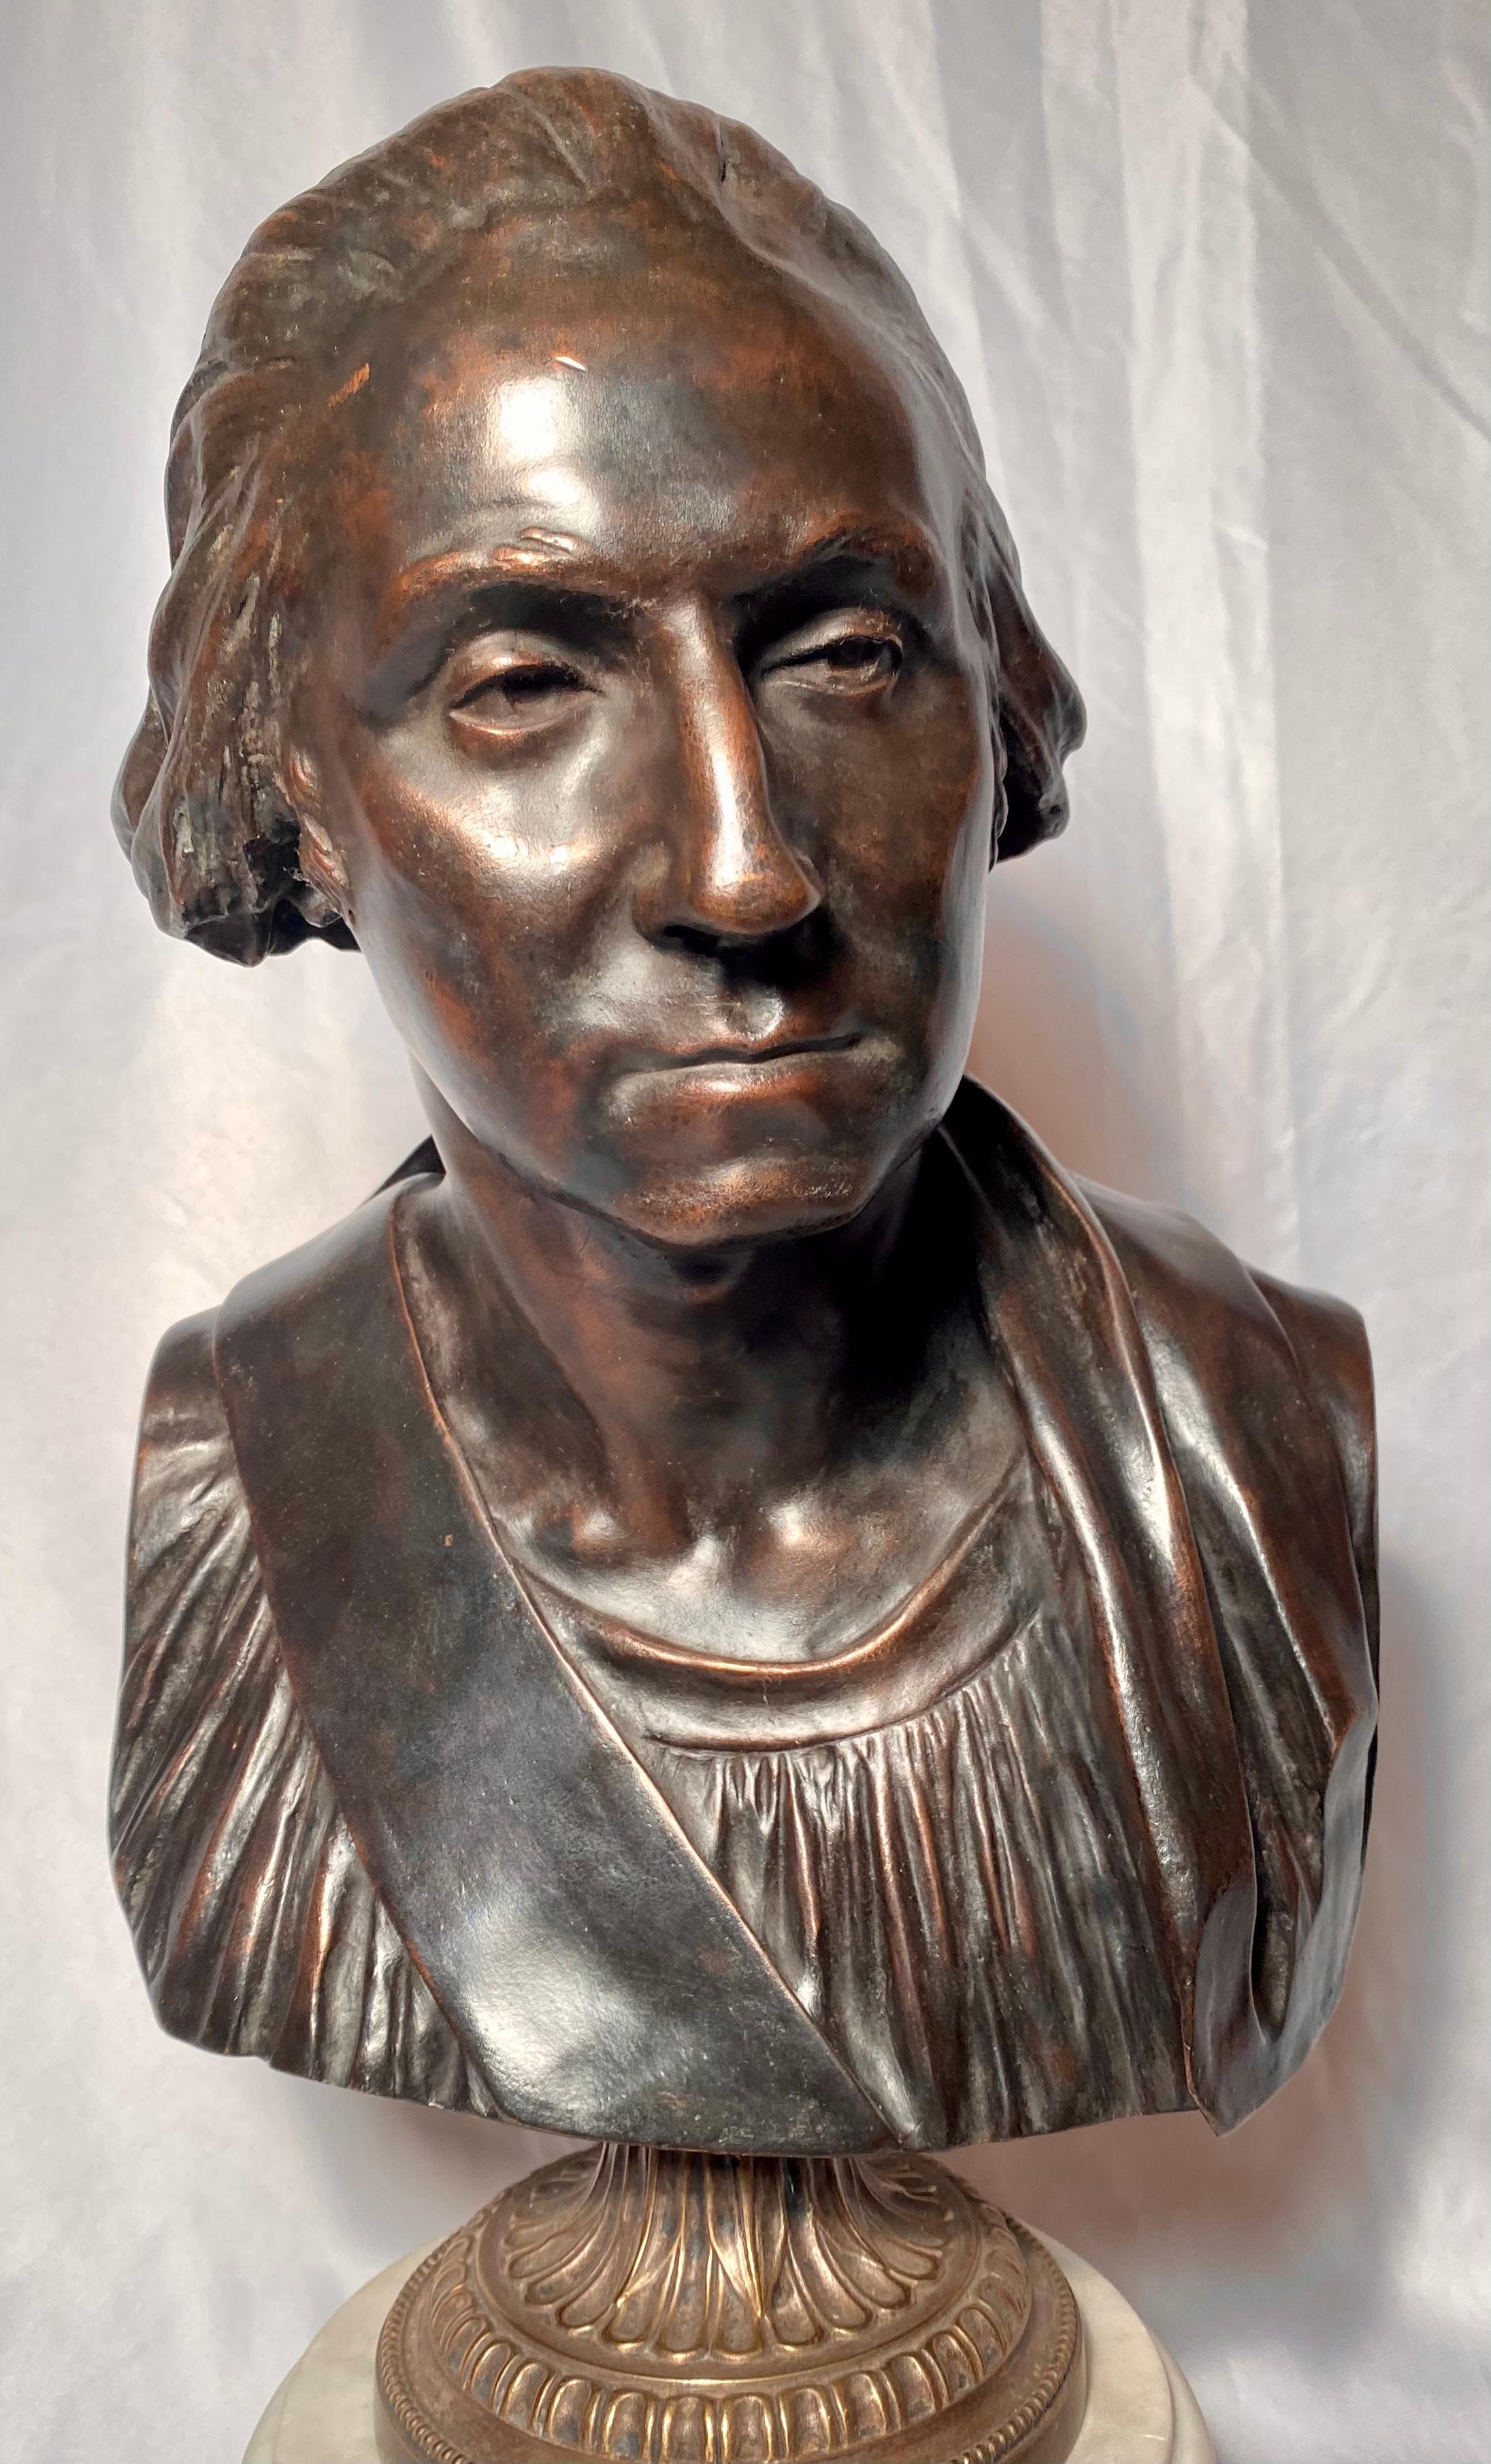 Wonderful bronze of Washington and in the manner of the bronze masters of the late 18th and early 19th century.